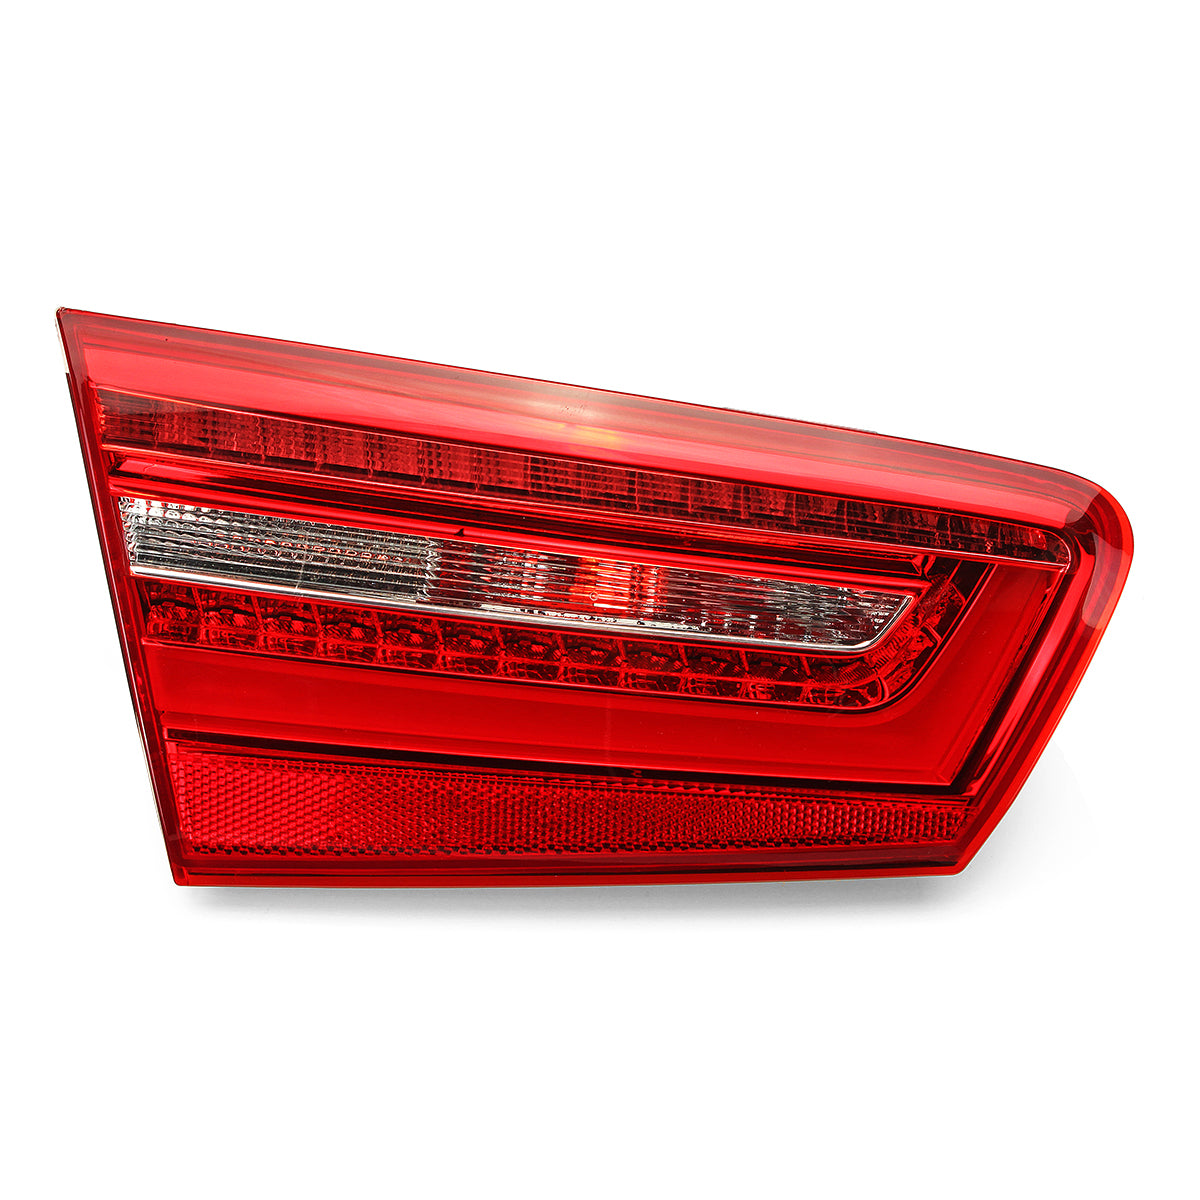 Firebrick Car LED Rear Inner Tail Light Brake Lamp with Bulb Wiring Harness for Audi A6 C7 2010-2016 Saloon 4GD945093 4GD945094